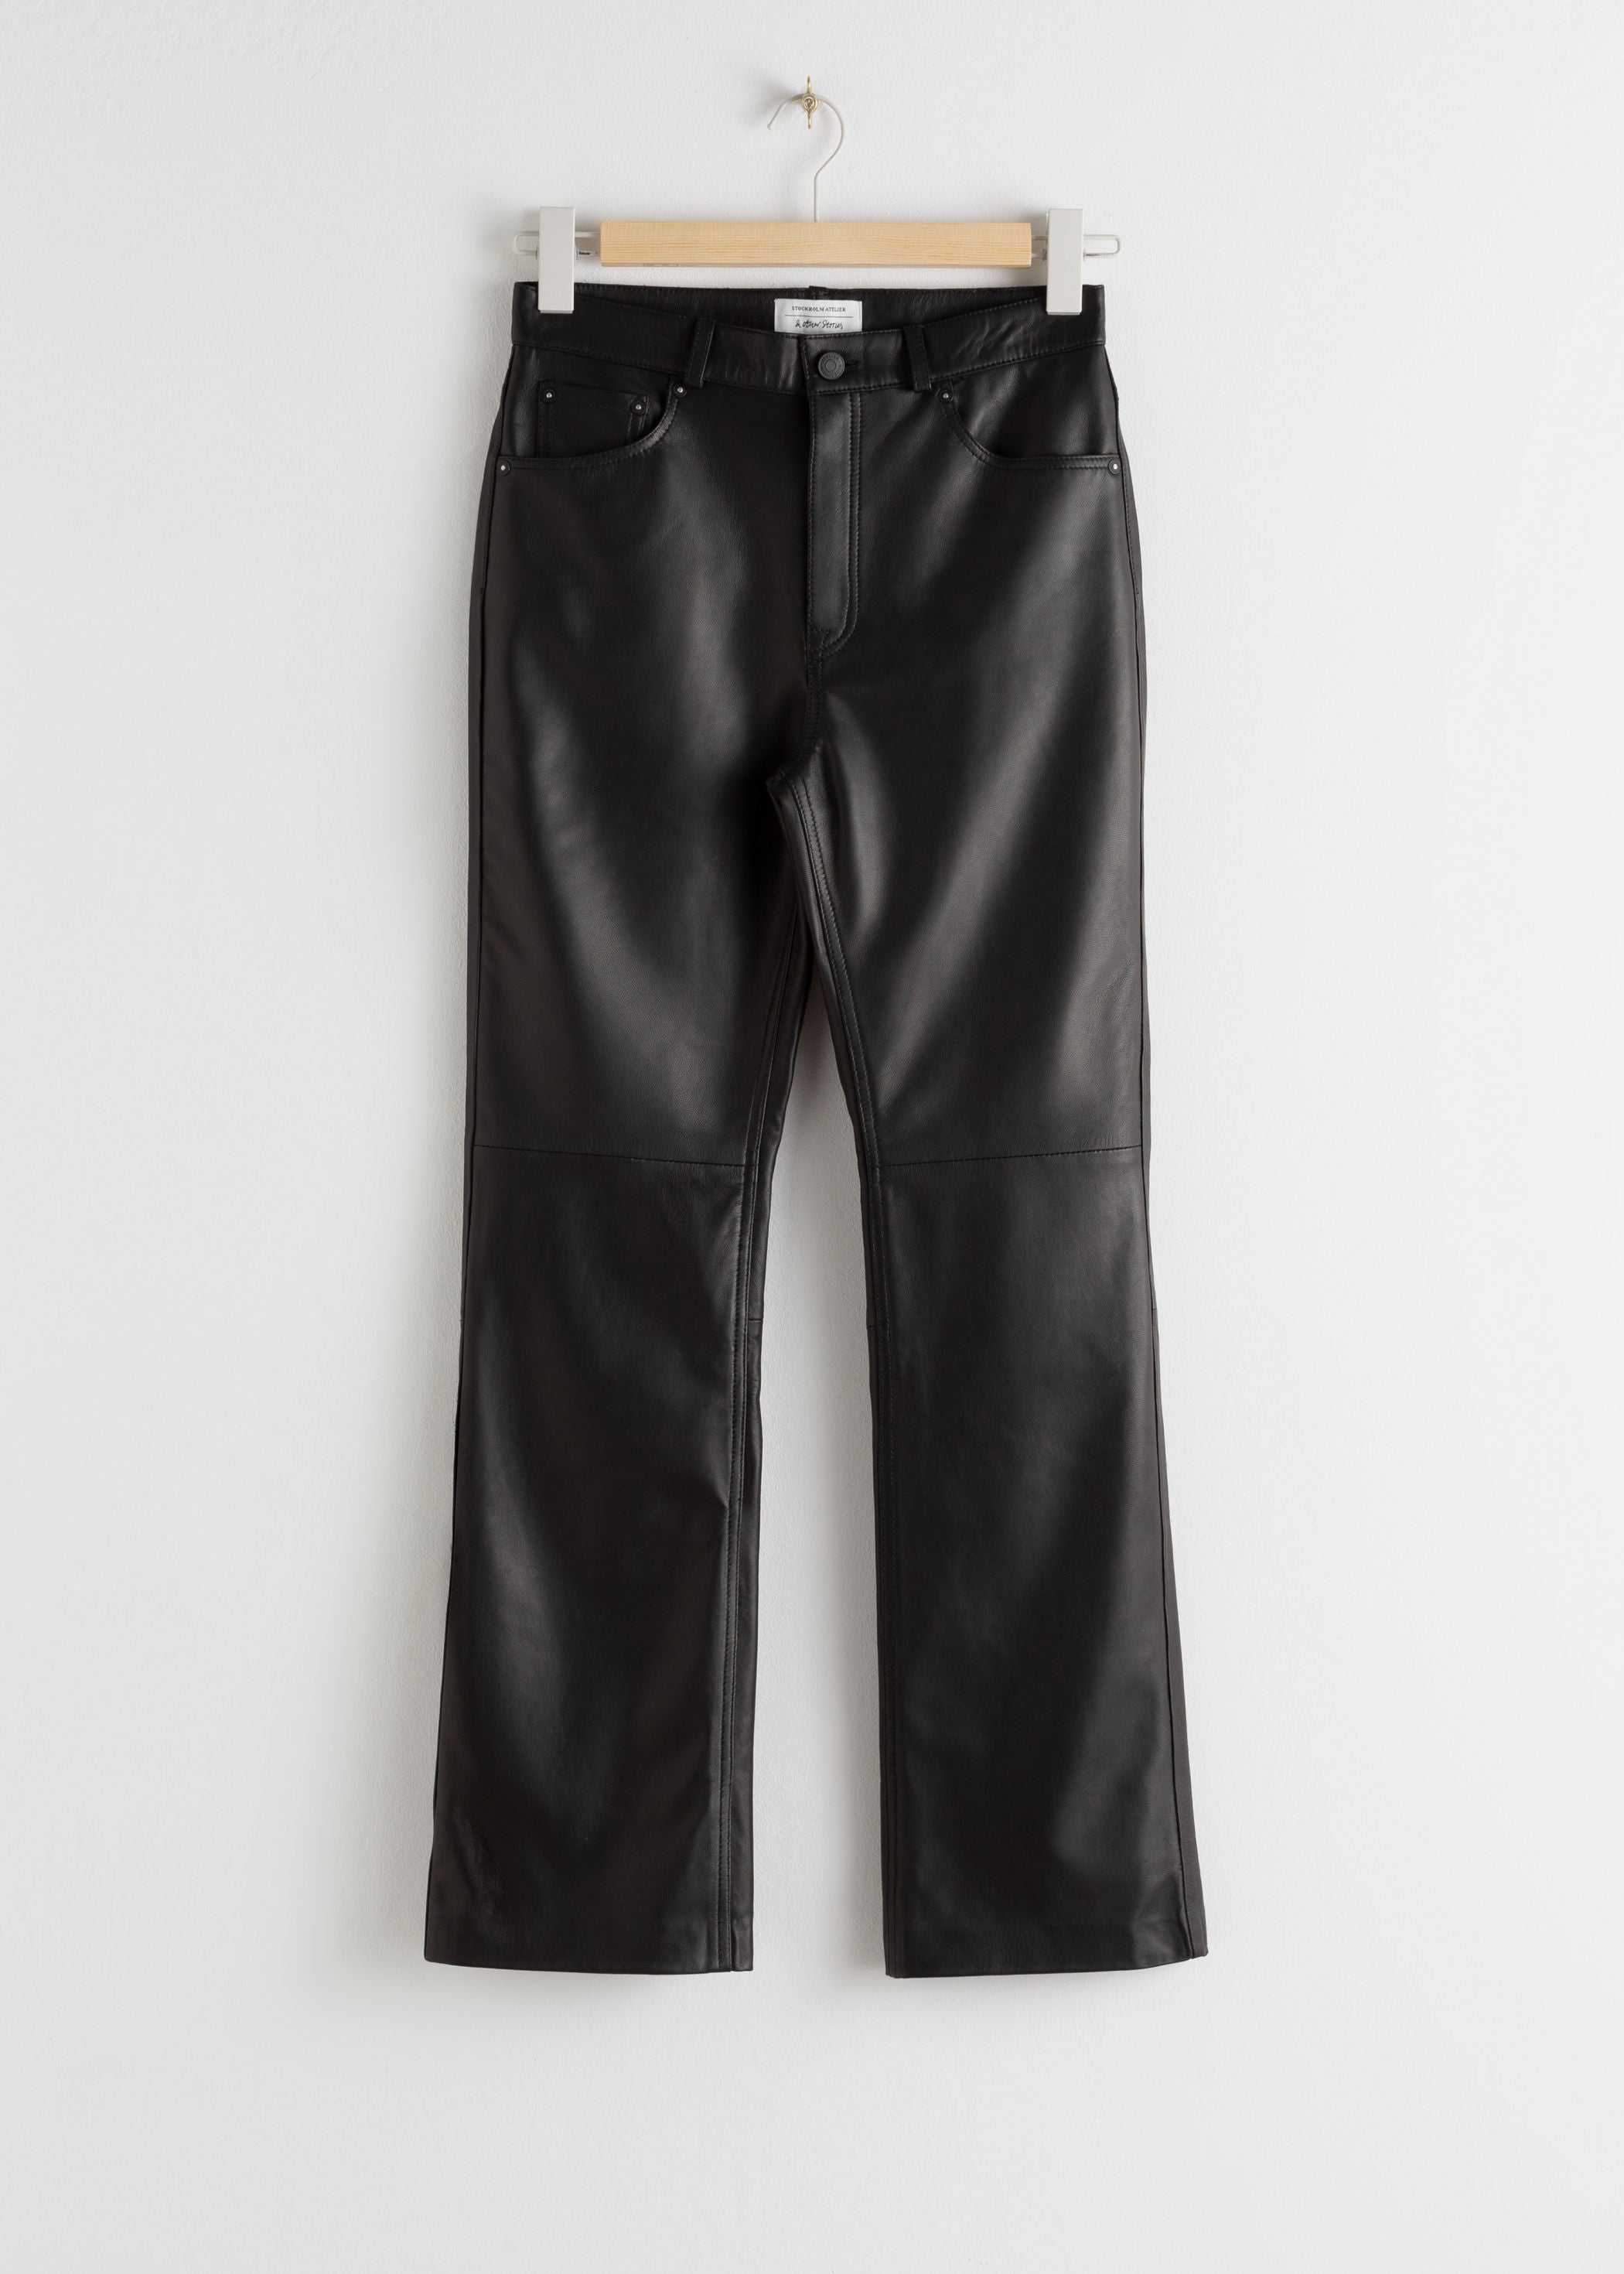 leather pants jeans